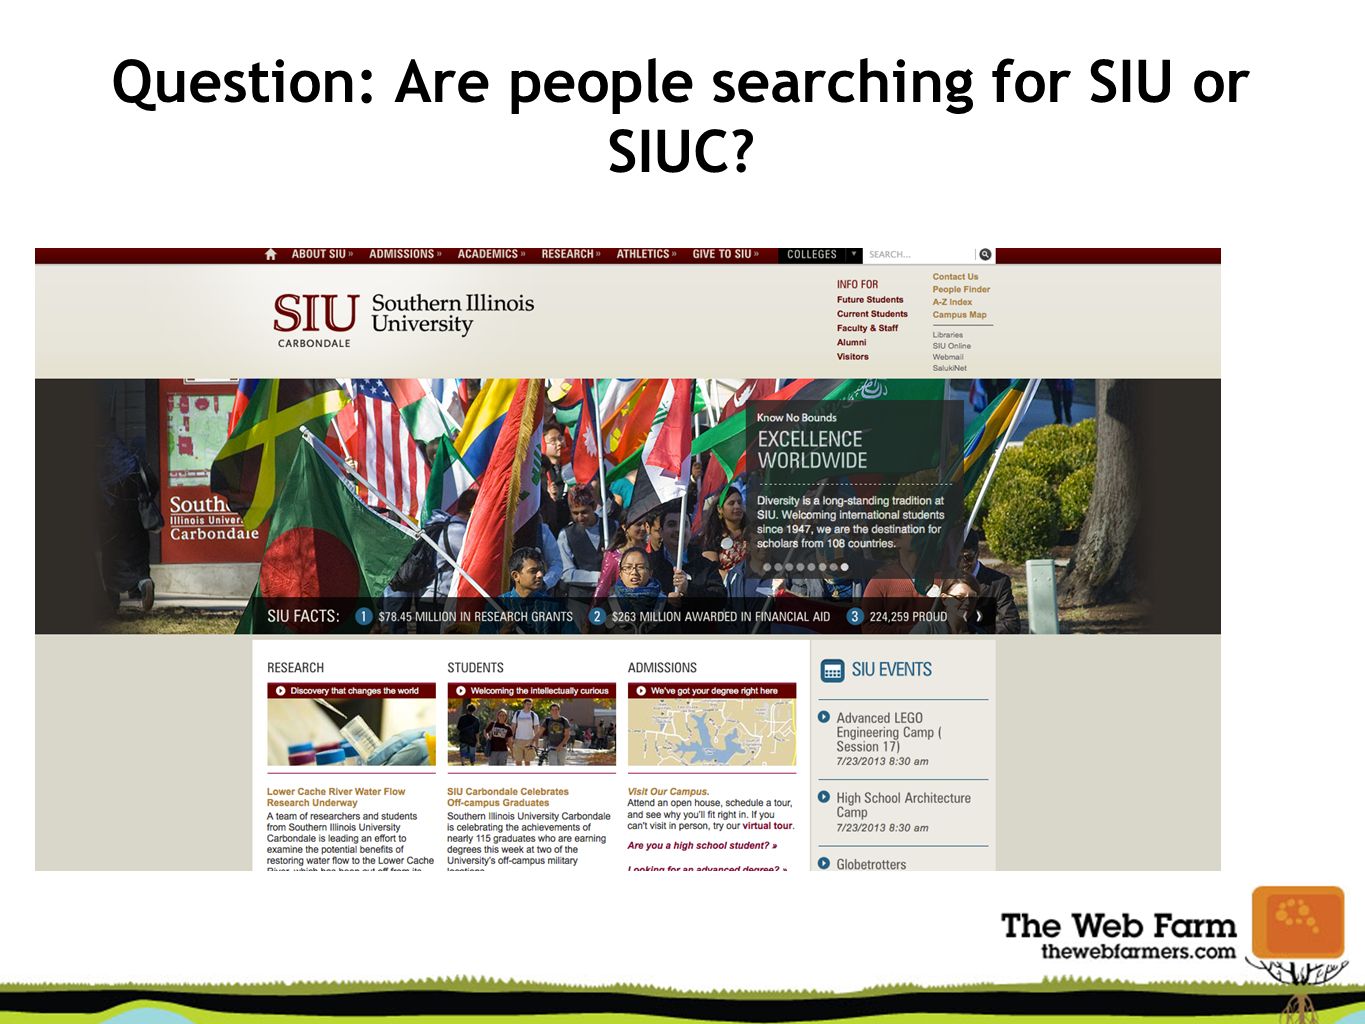 Question: Are people searching for SIU or SIUC